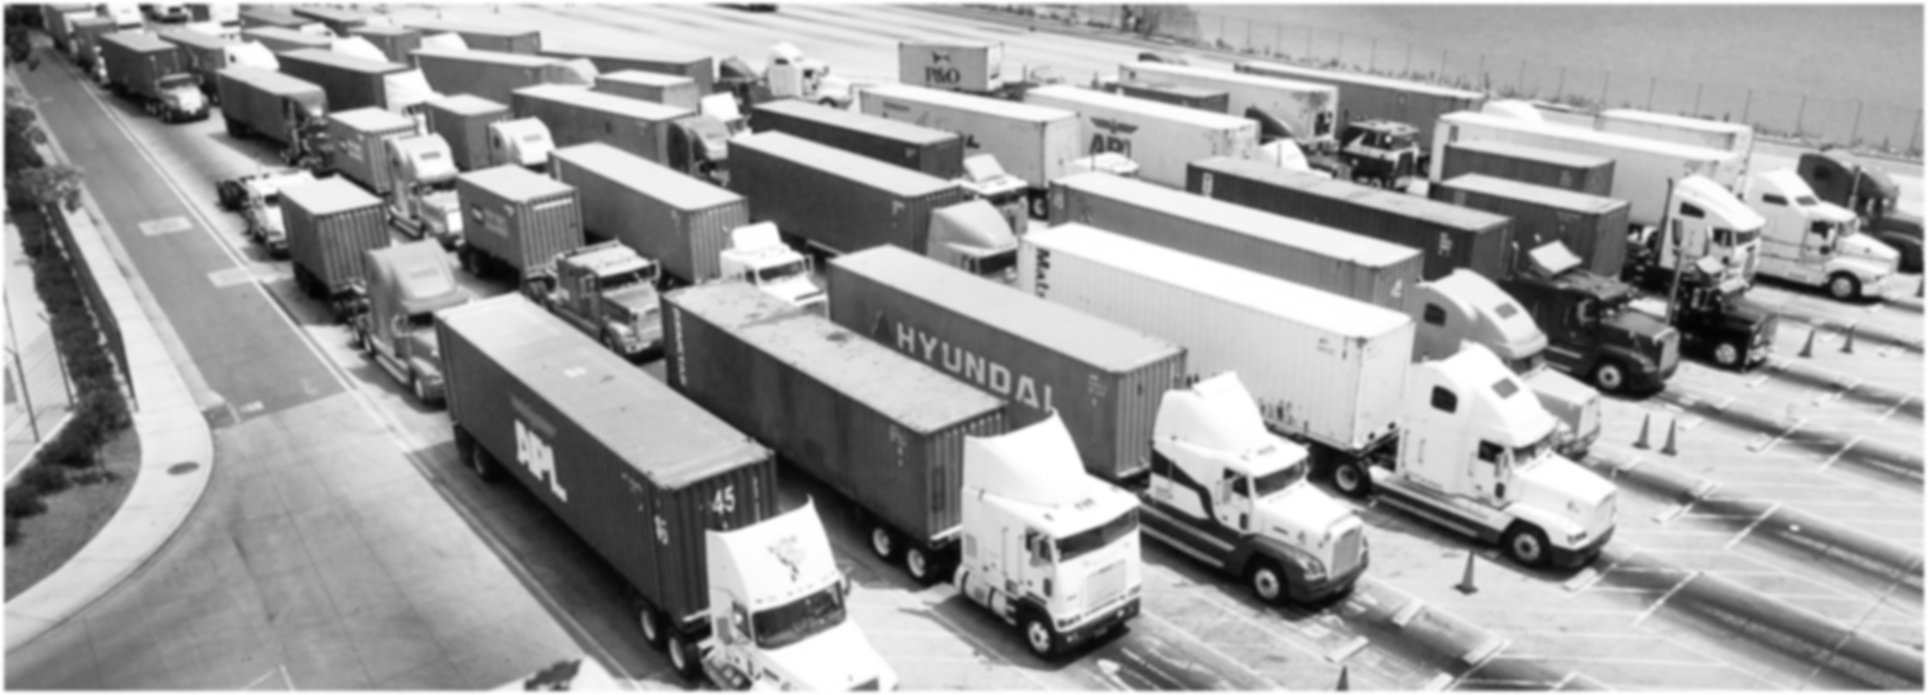 Choosing the Optimal Time for Freight Transport to Avoid Traffic Jams and Peak Hours